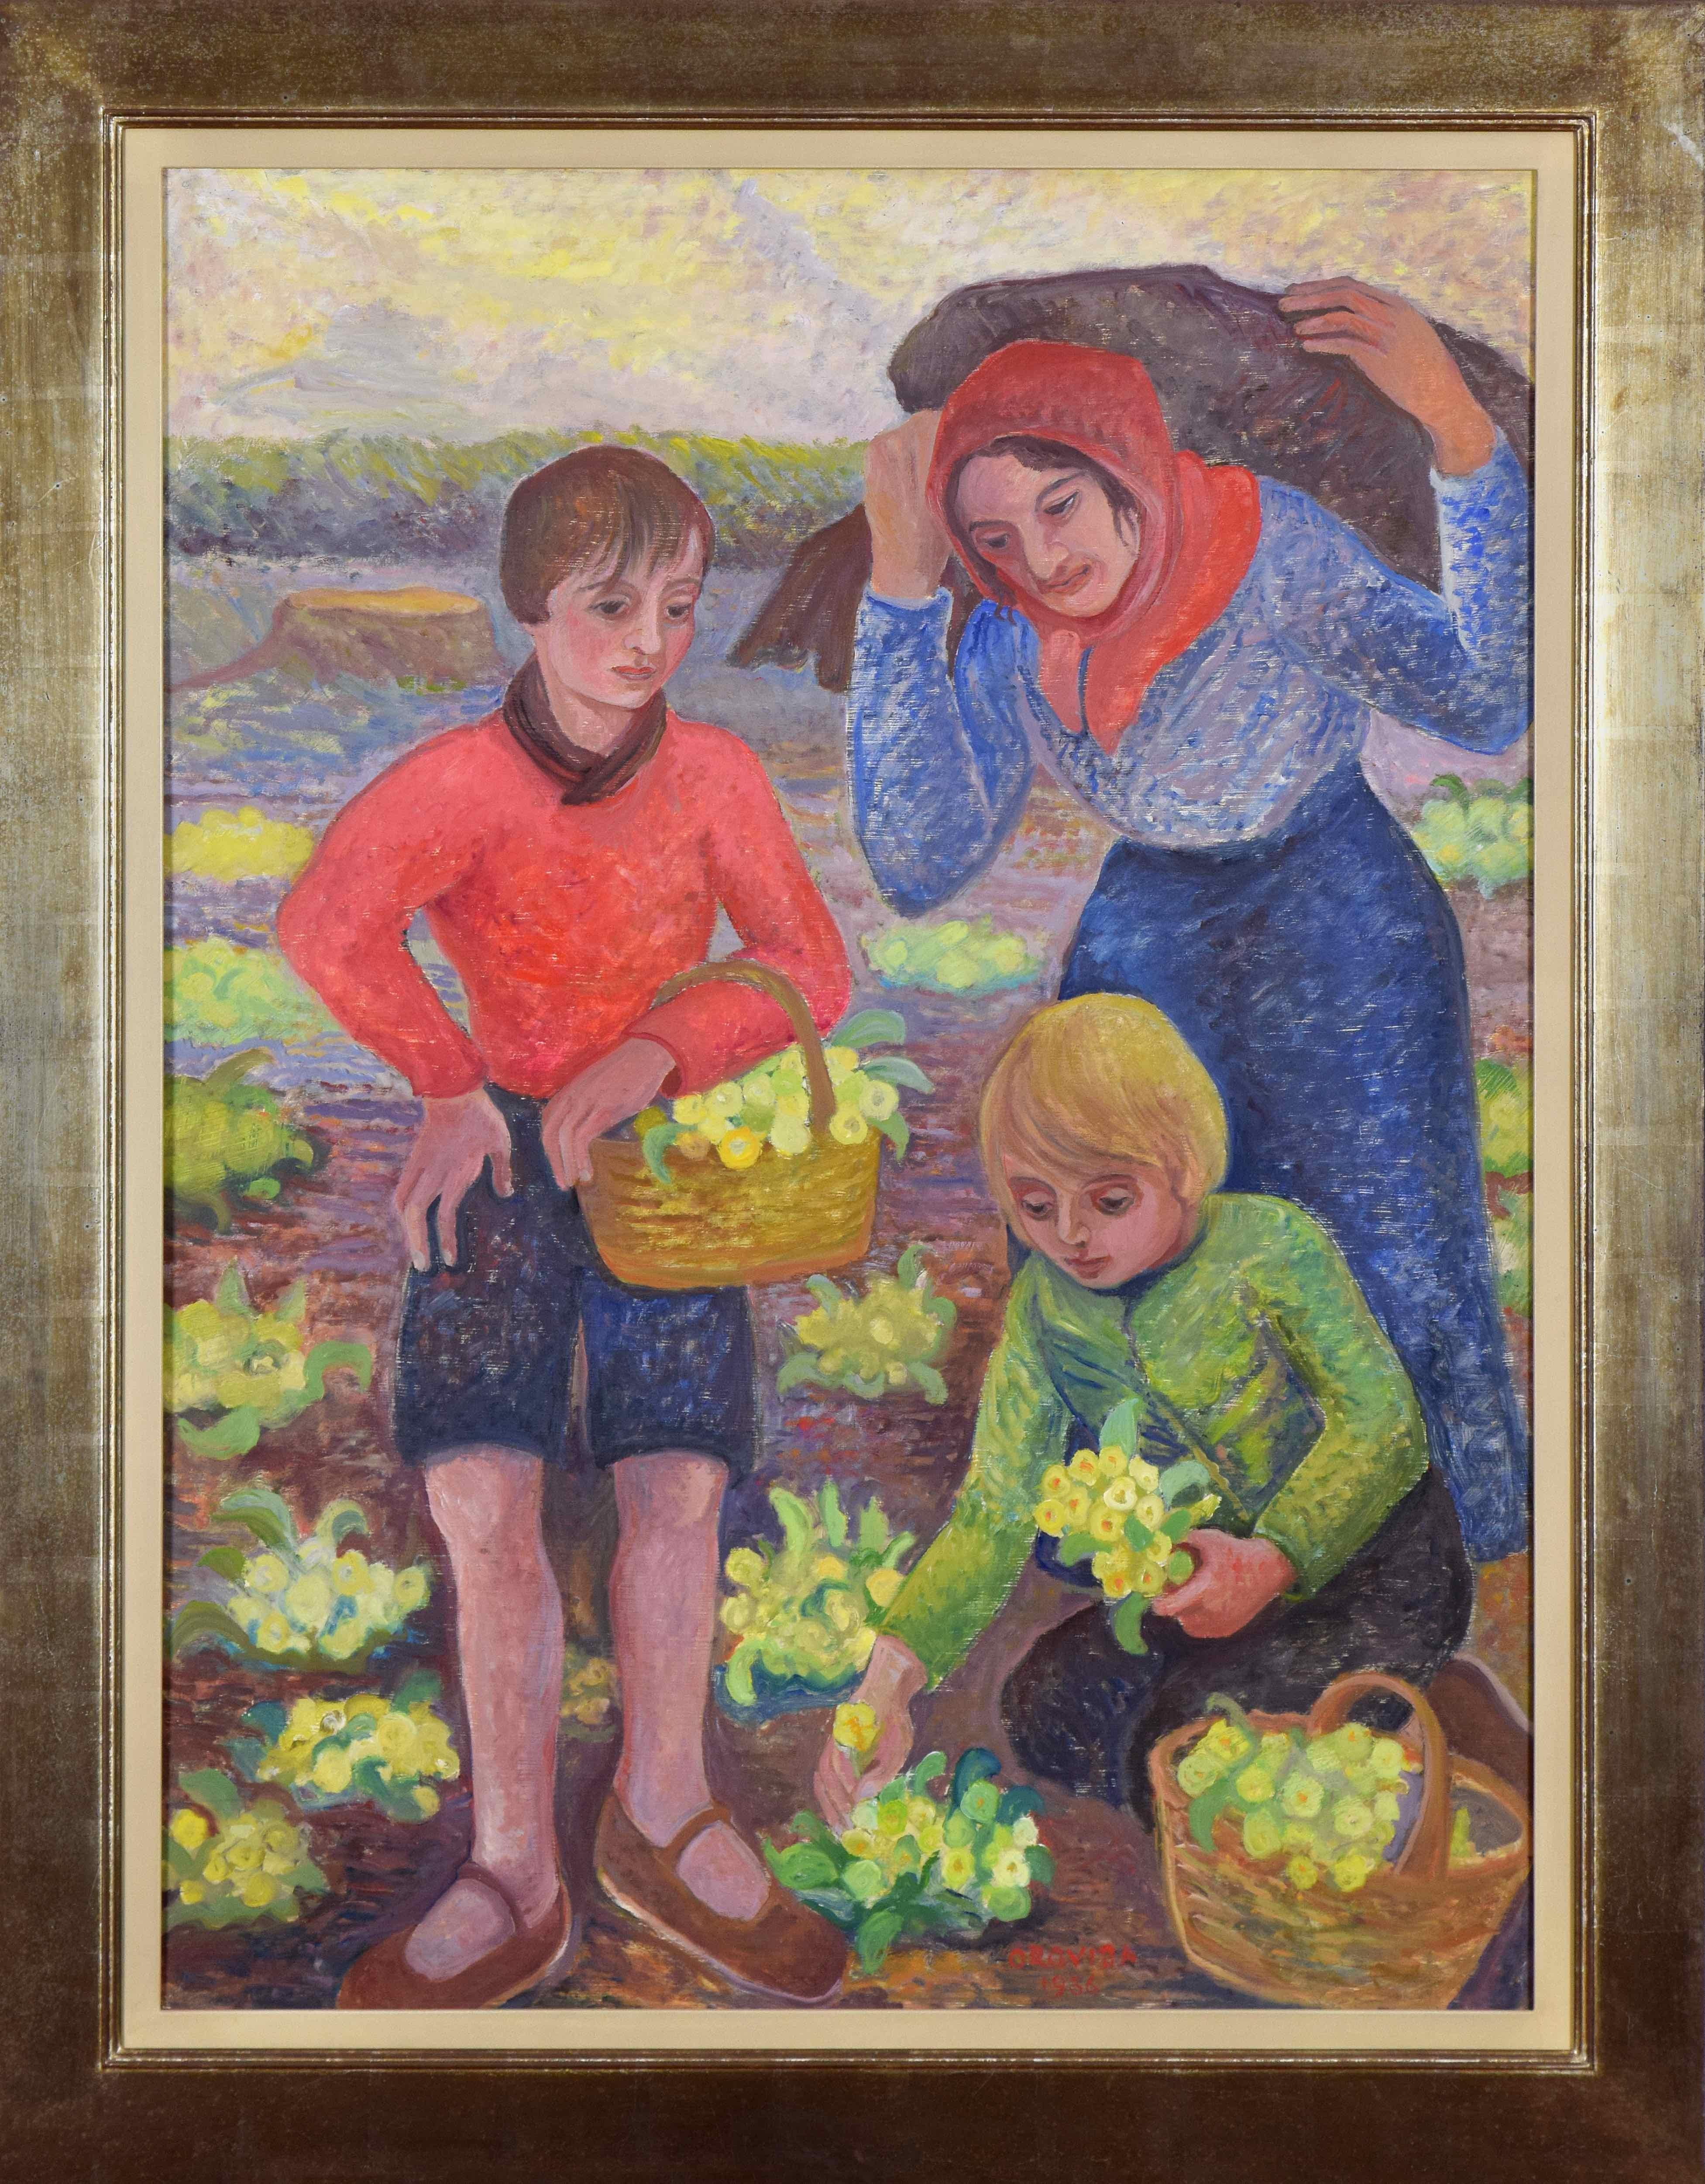 Spring (Primrose Gathering) by Orovida Pissarro (1893-1968)
Oil on board
101.5 x 76.4 cm (40 x 30 inches)
Signed and dated lower centre Orovida 1956

Provenance
Estate of Orovida Pissarro
With John Bensusan-Butt, cousin of the artist
G Hassell, 25th